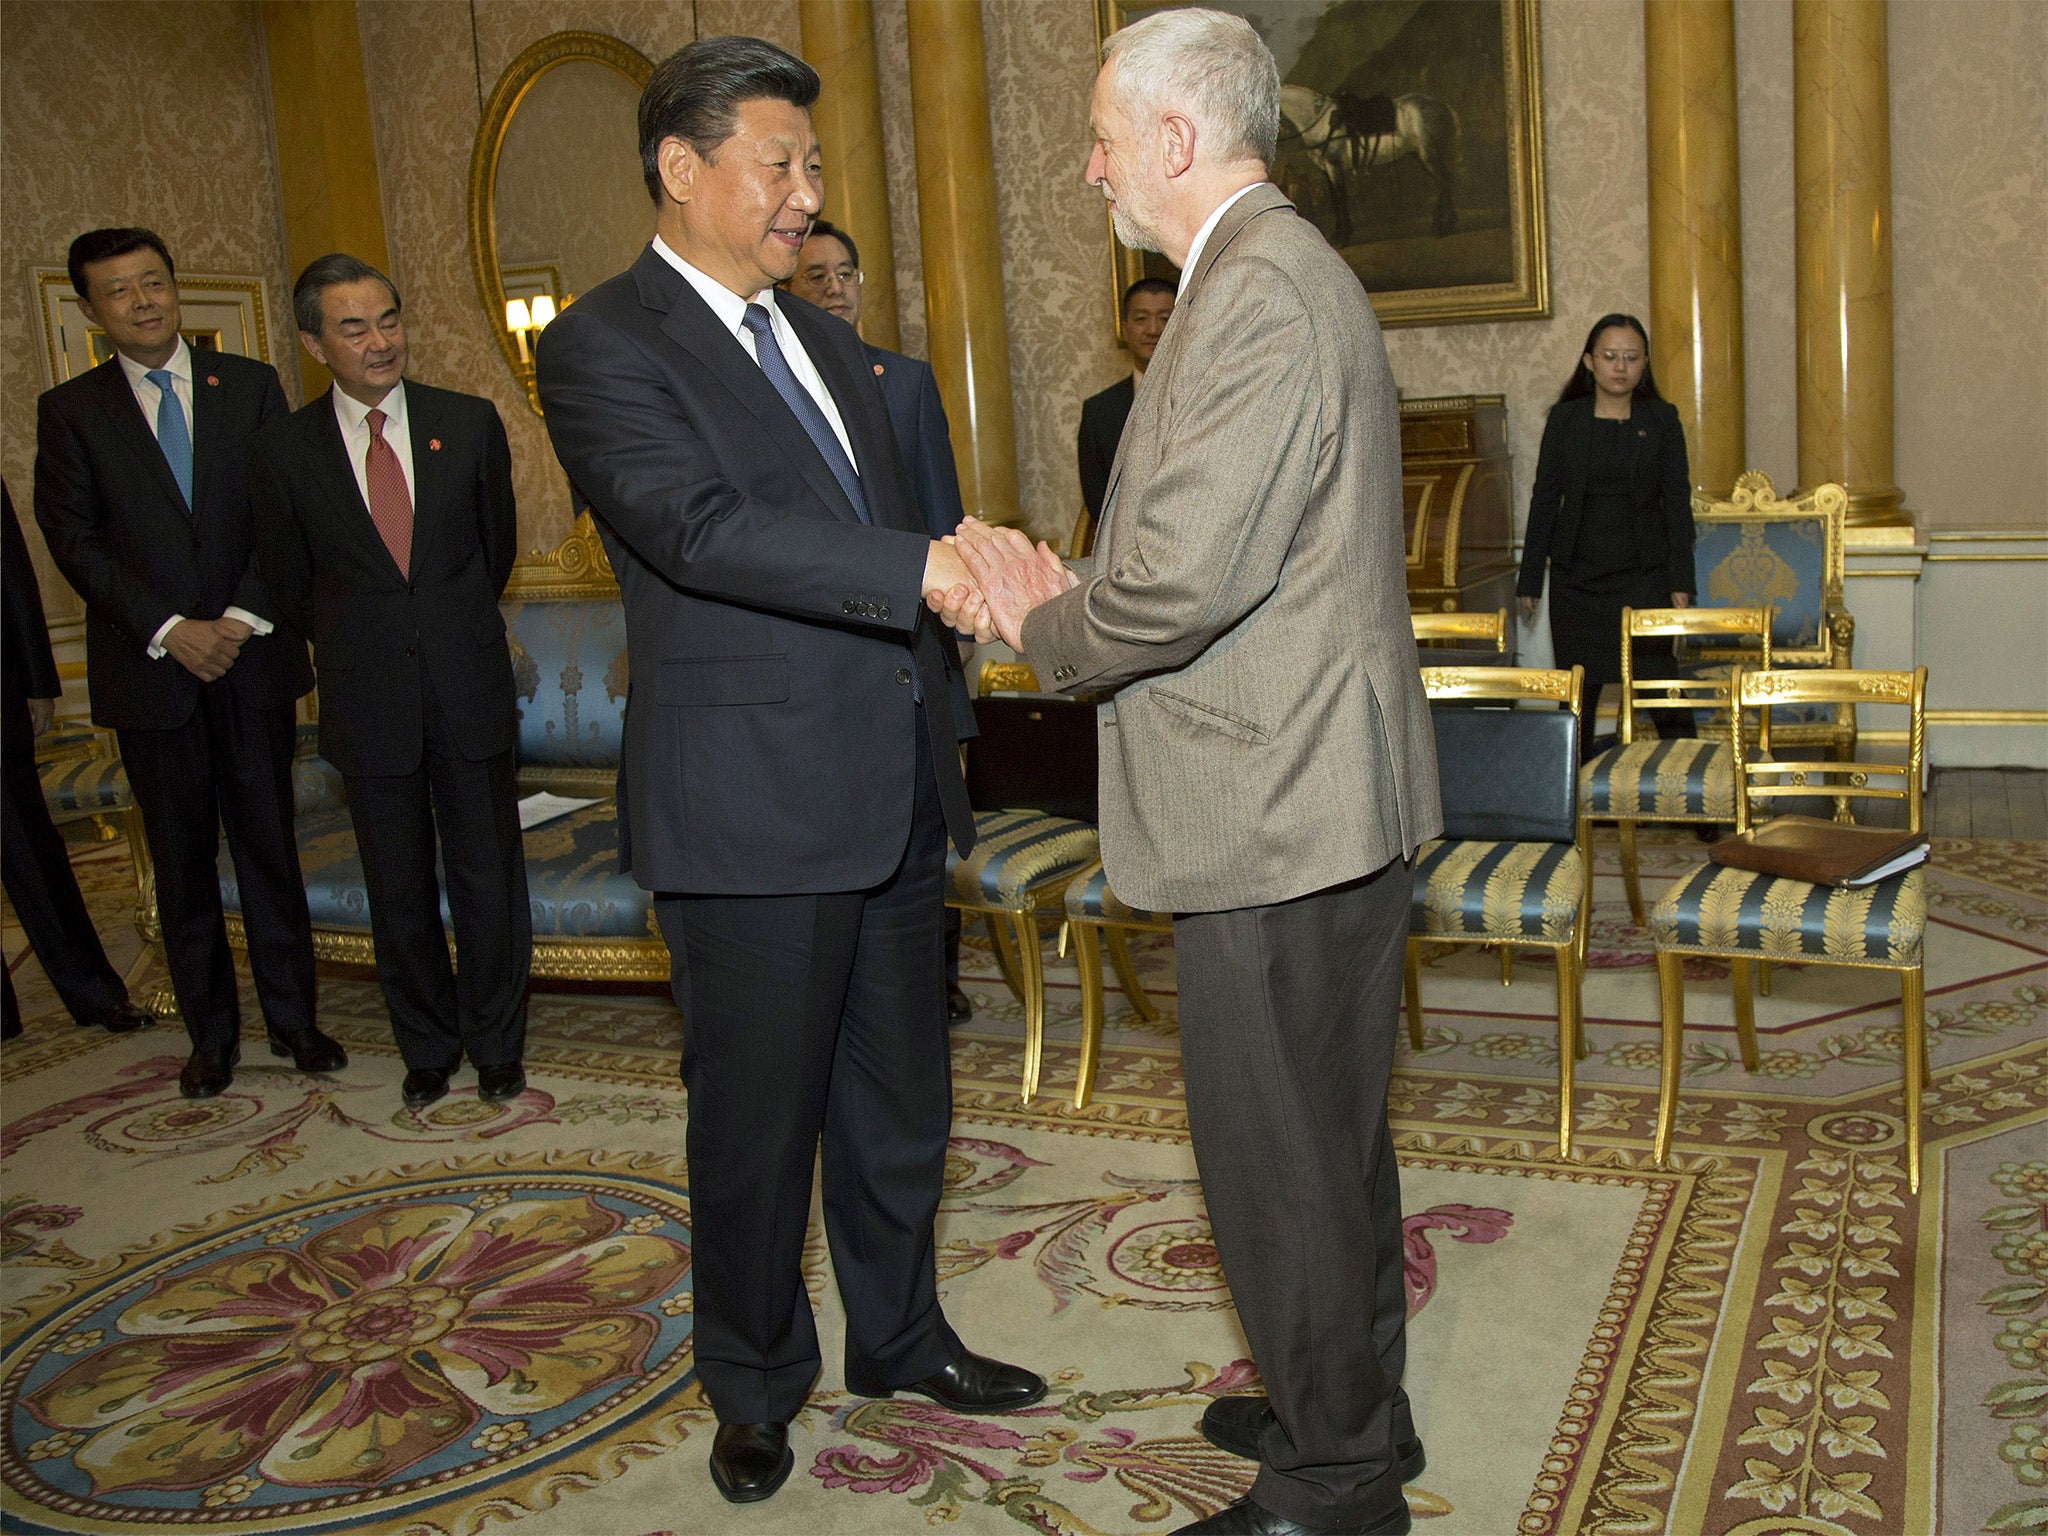 President Xi Jinping meets the Labour leader at Buckingham Place (Getty)